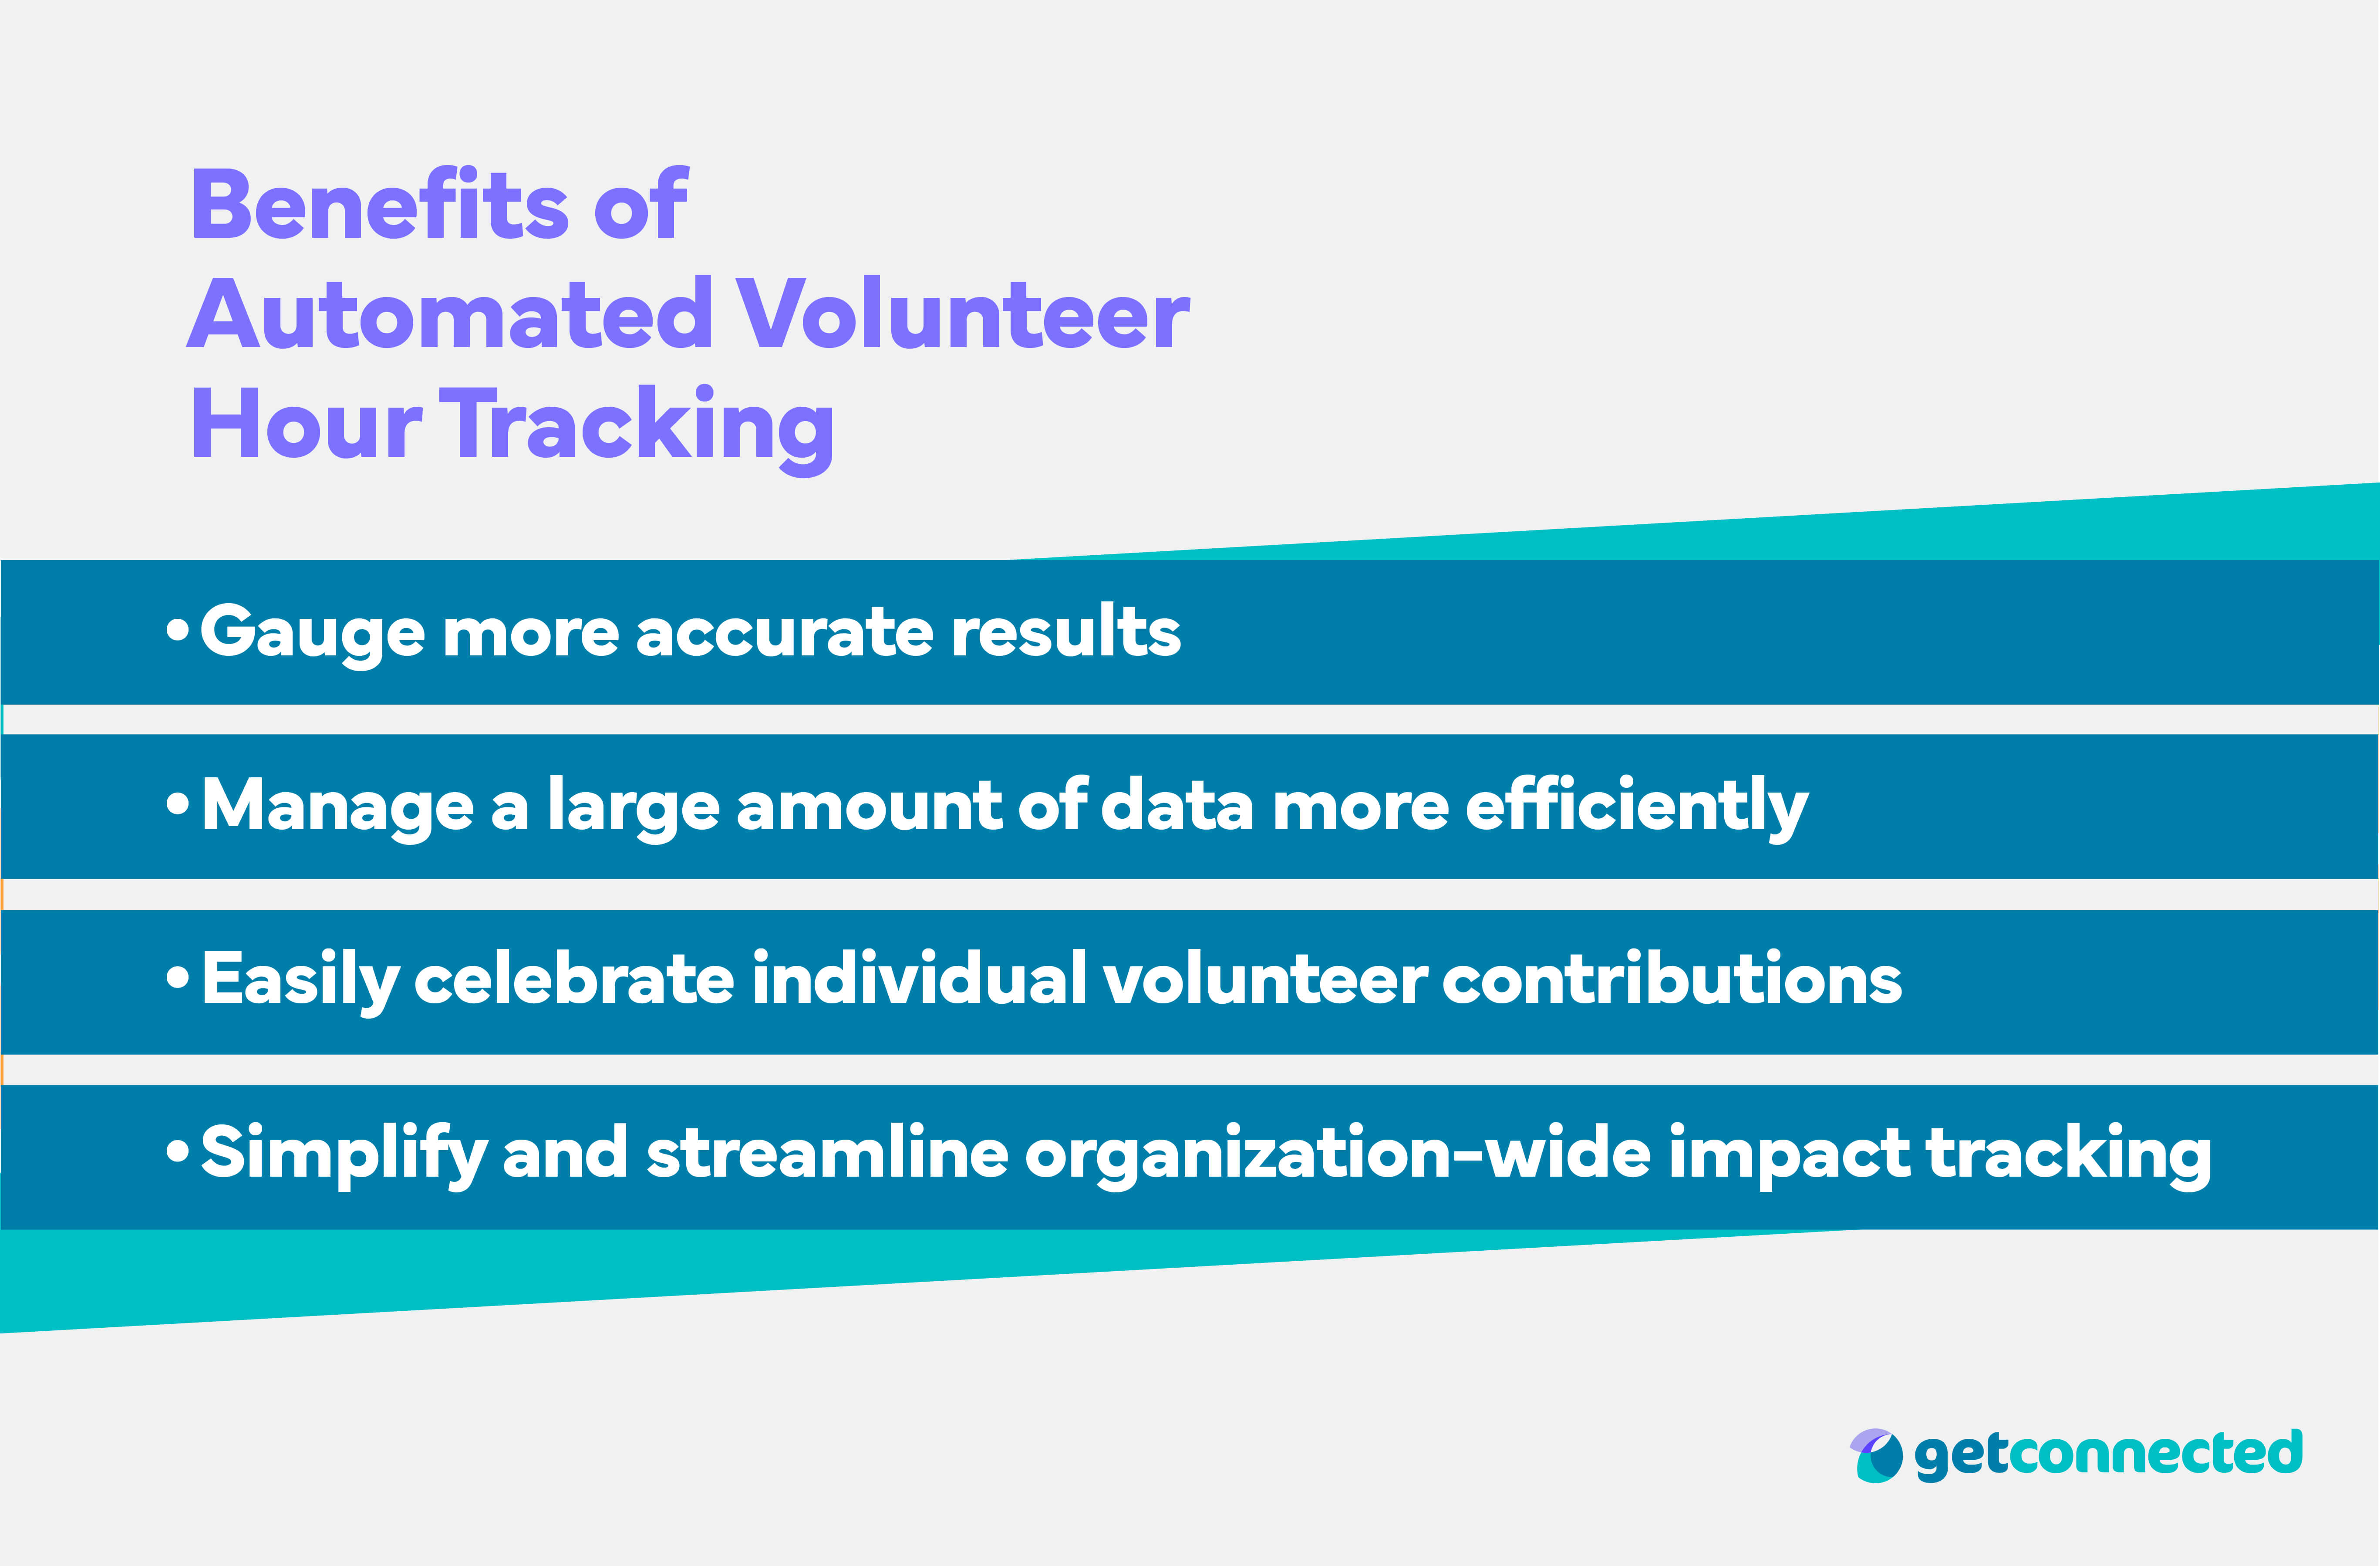 Volunteer hours log and the benefits of automated volunteer hours tracking